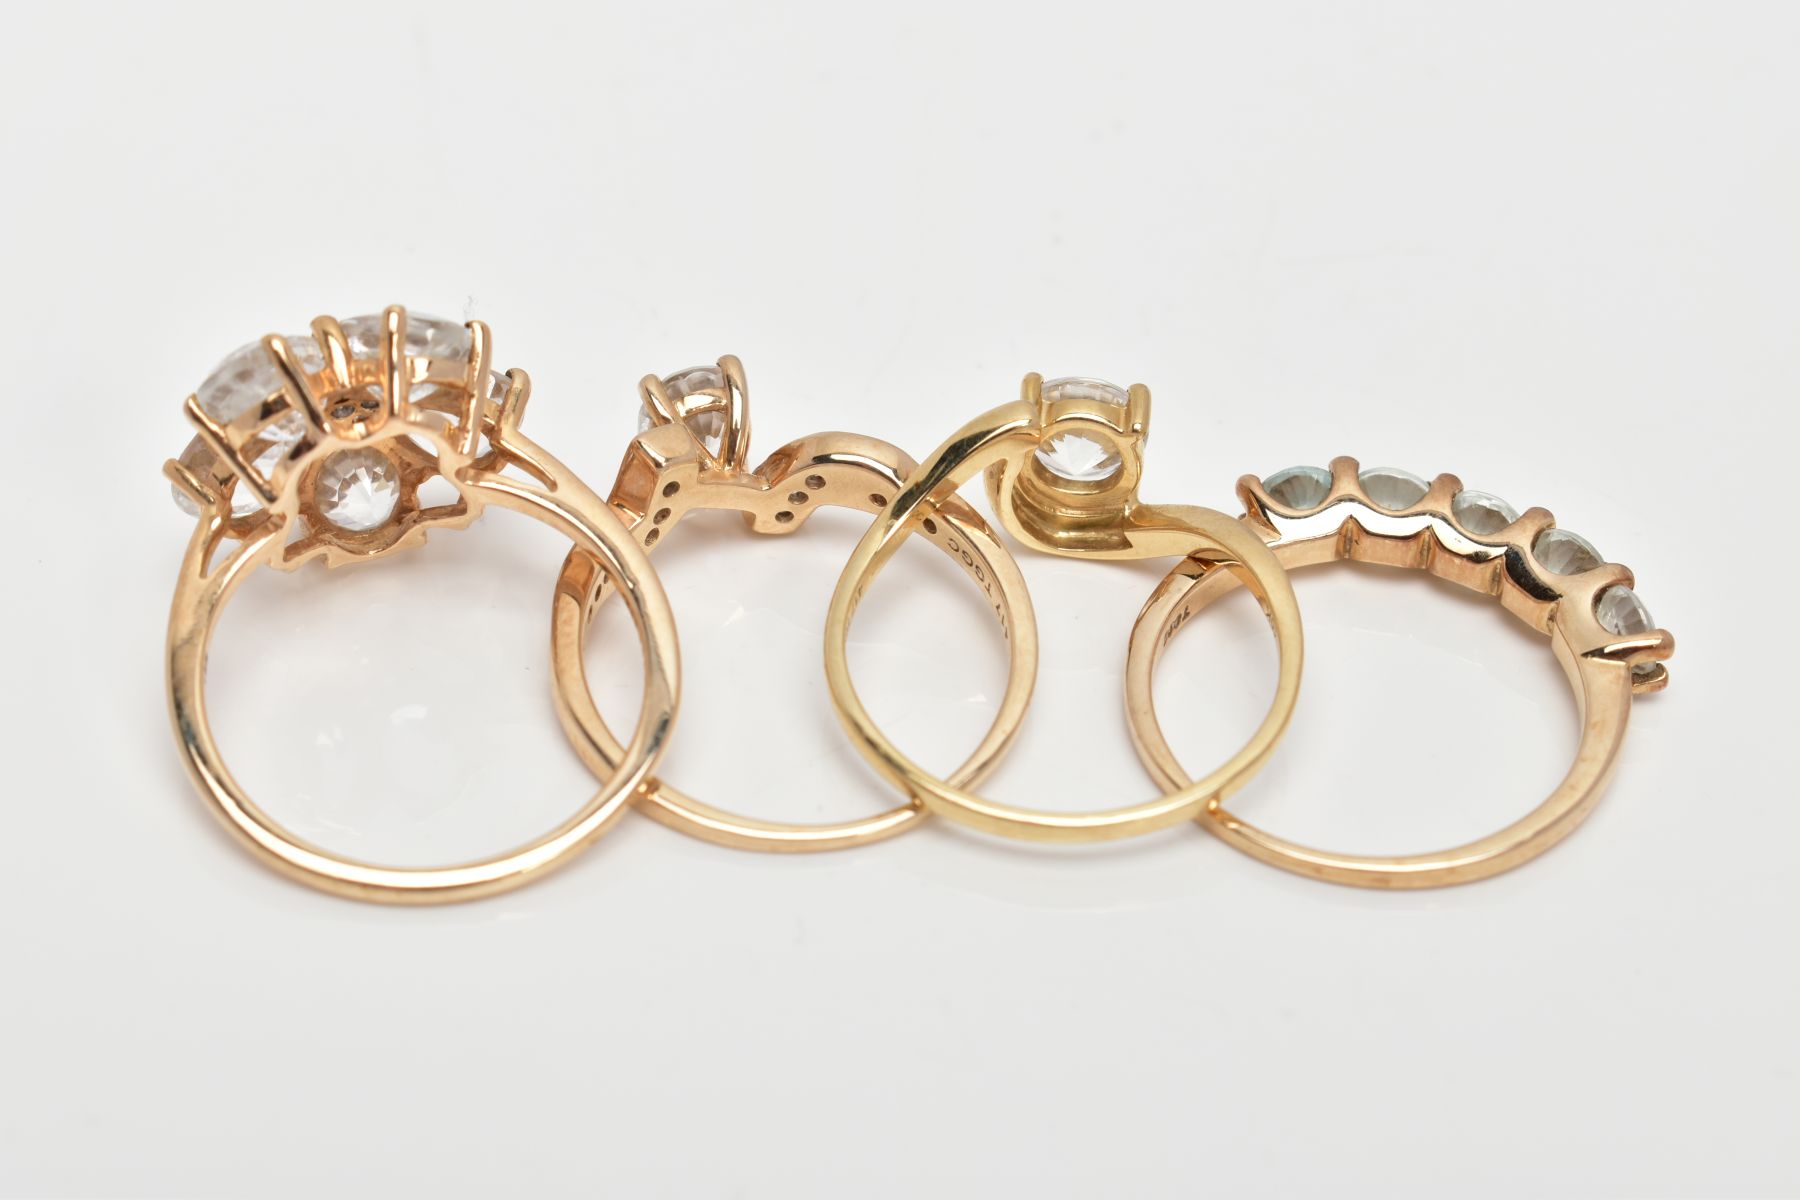 FOUR 9CT GOLD COLOURLESS ZIRCON SET DRESS RINGS, each with a 9ct gold hallmark for Birmingham, - Image 3 of 3